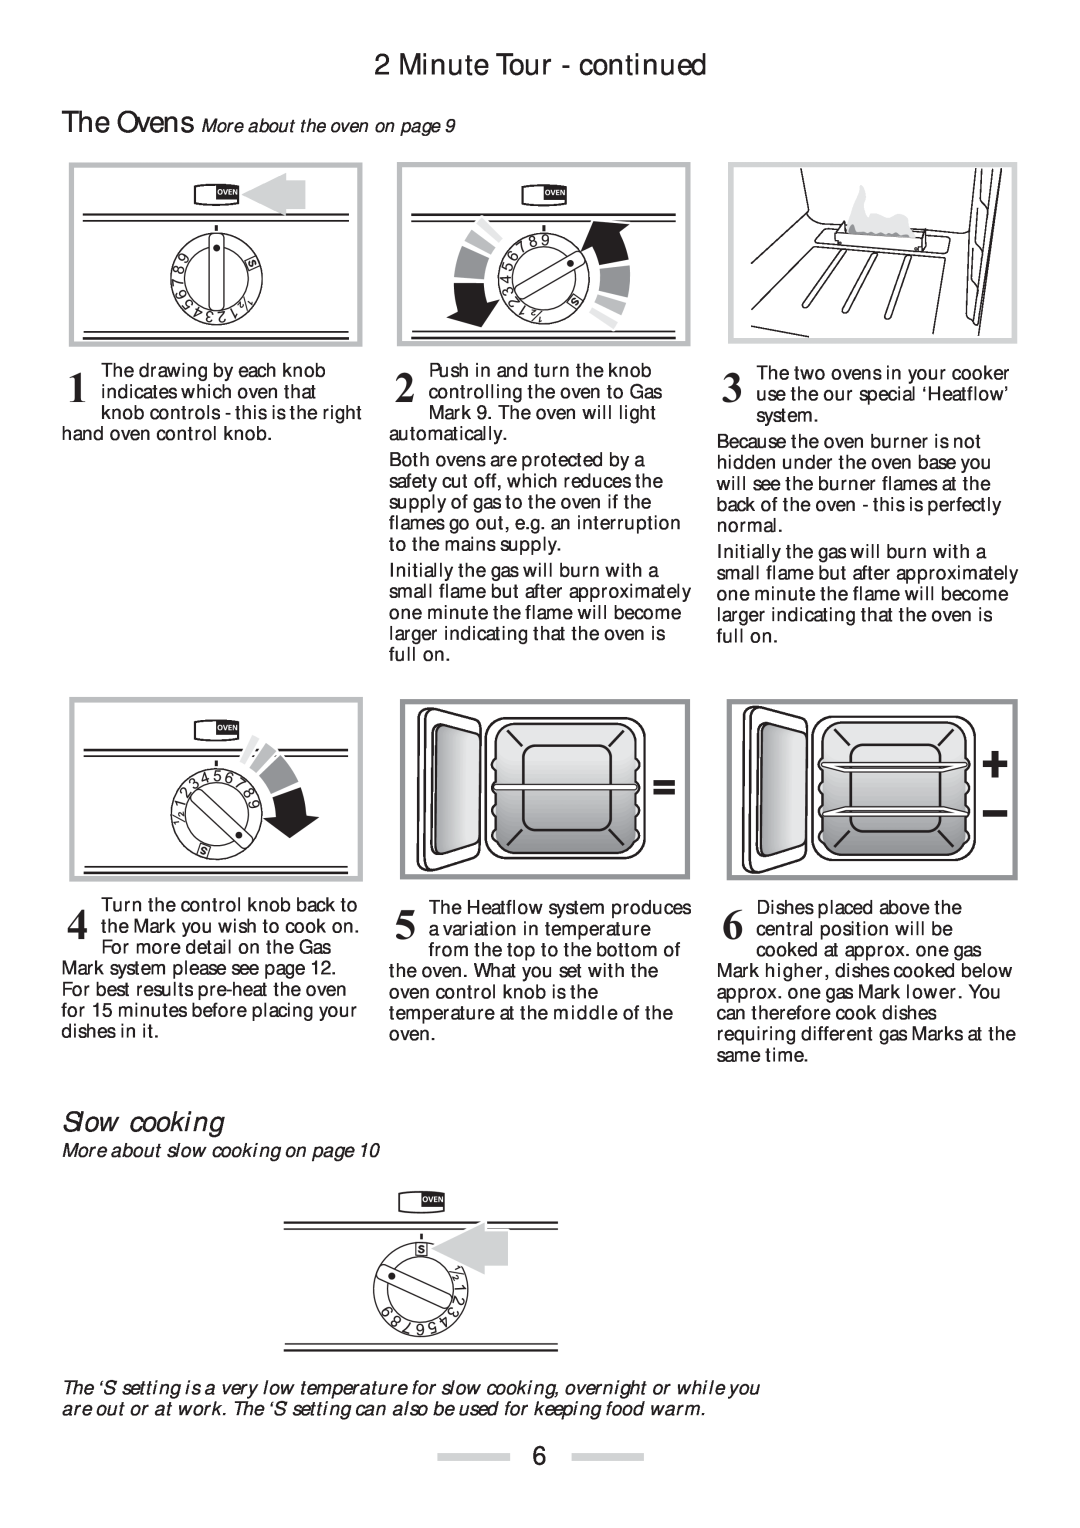 Rangemaster 110 installation instructions Slow cooking, Minute Tour - continued, The Ovens More about the oven on page 